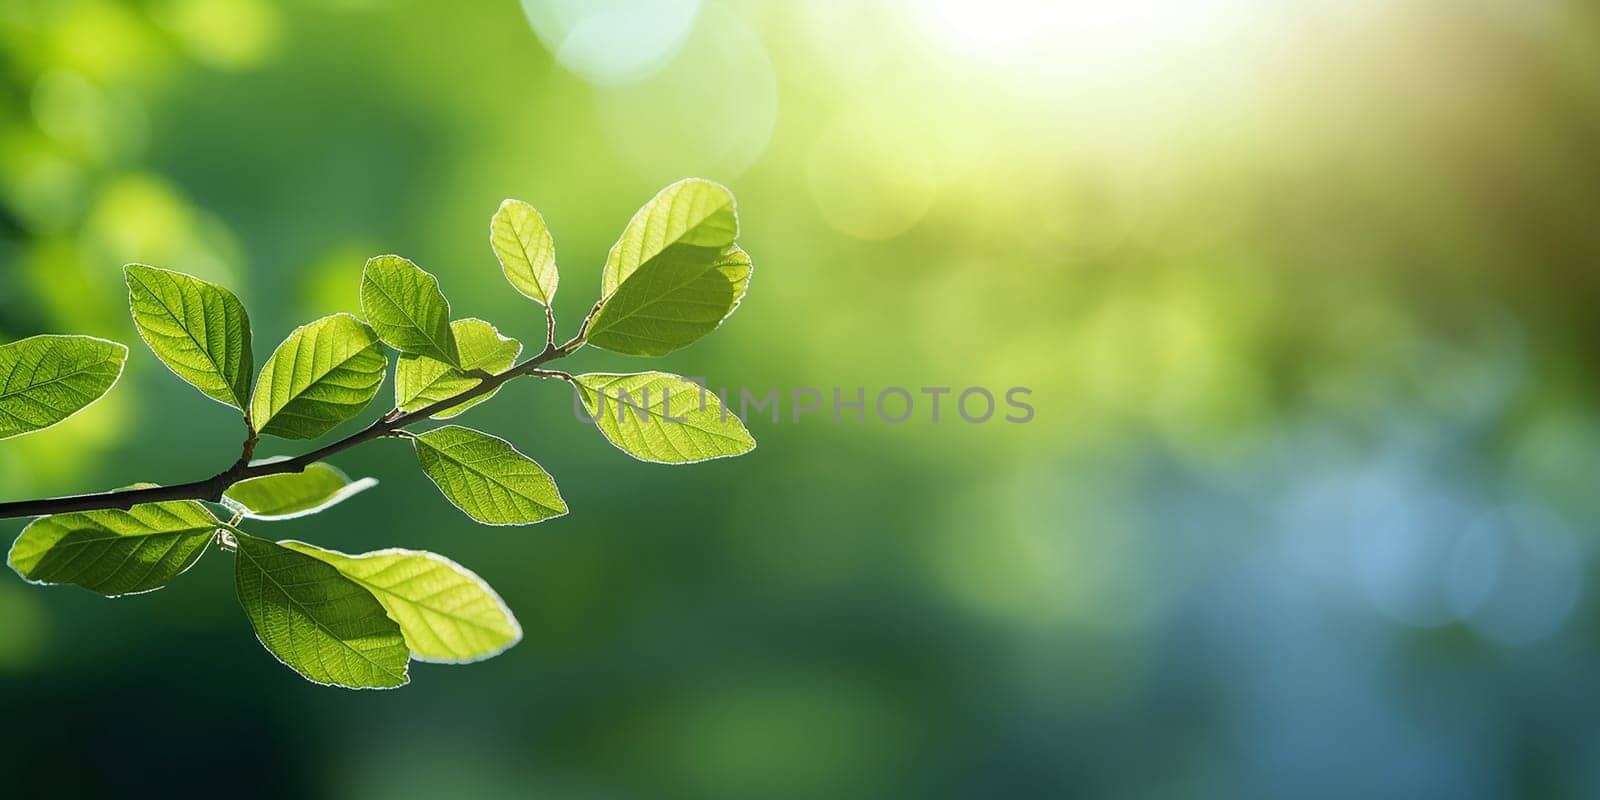 Green leaves on a branch with sunlight filtering through.